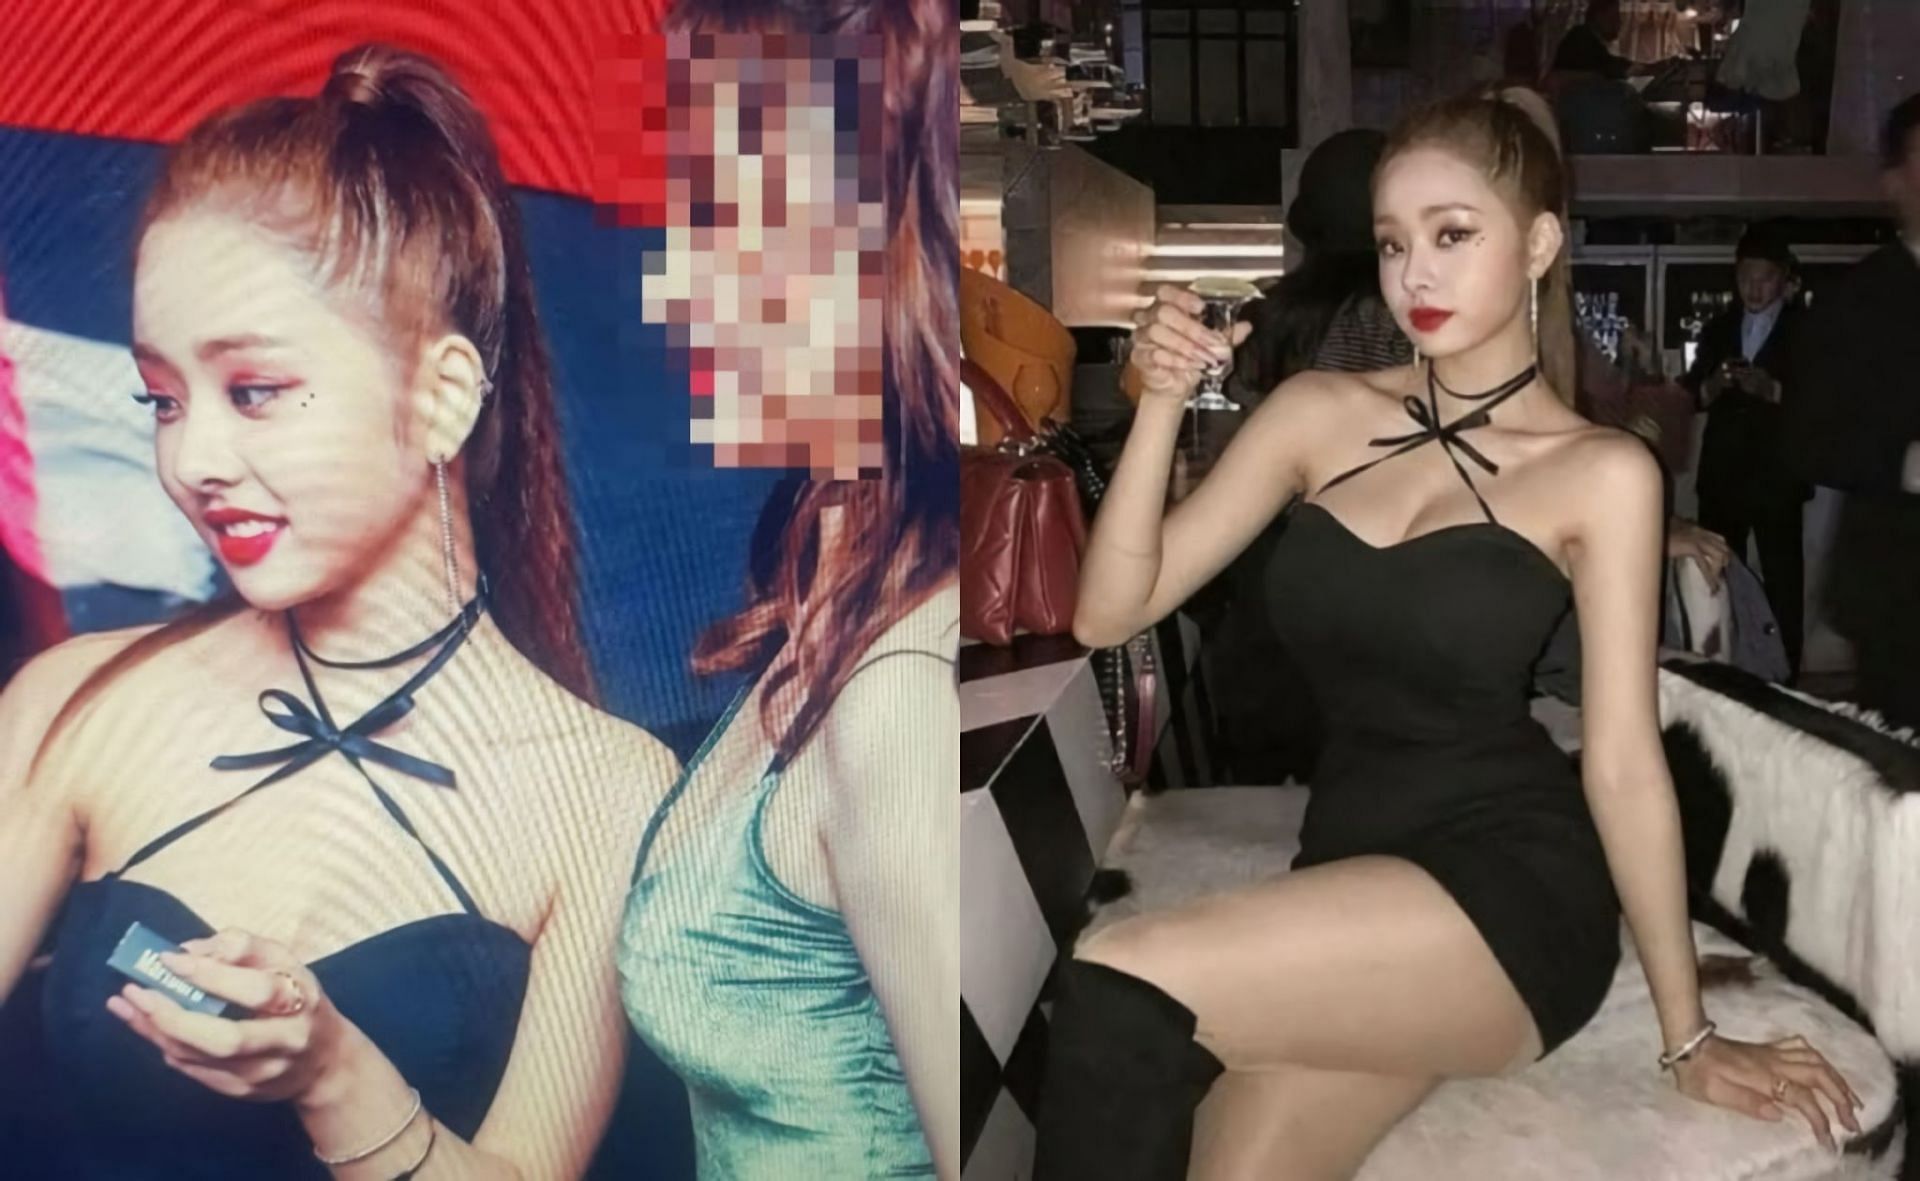 Old Pictures Of Song Ji Ah At The Infamous Burning Sun Club Leave Netizens Divided 5406